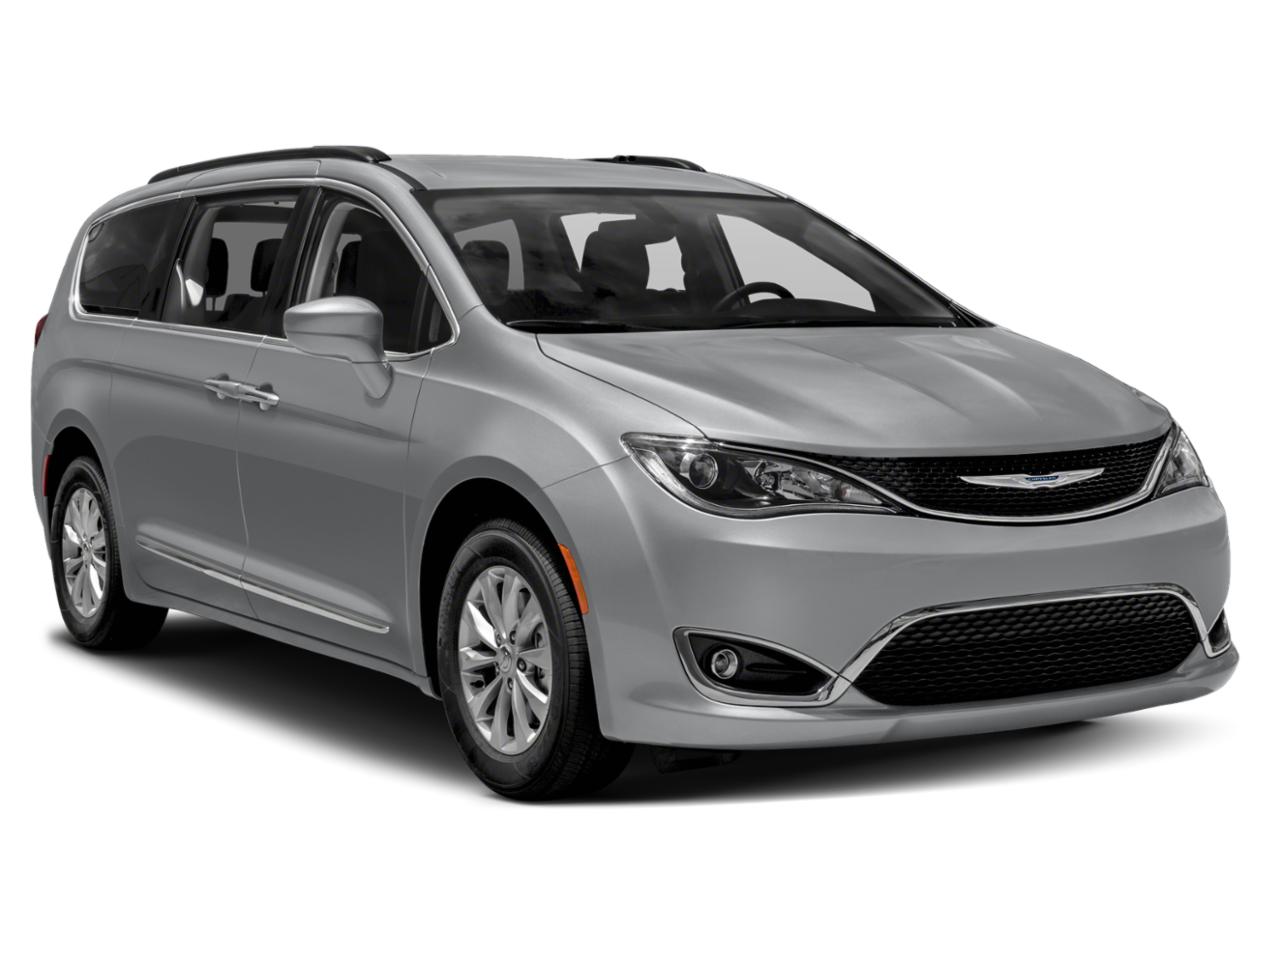 2019 Chrysler Pacifica Vehicle Photo in OAK LAWN, IL 60453-2517